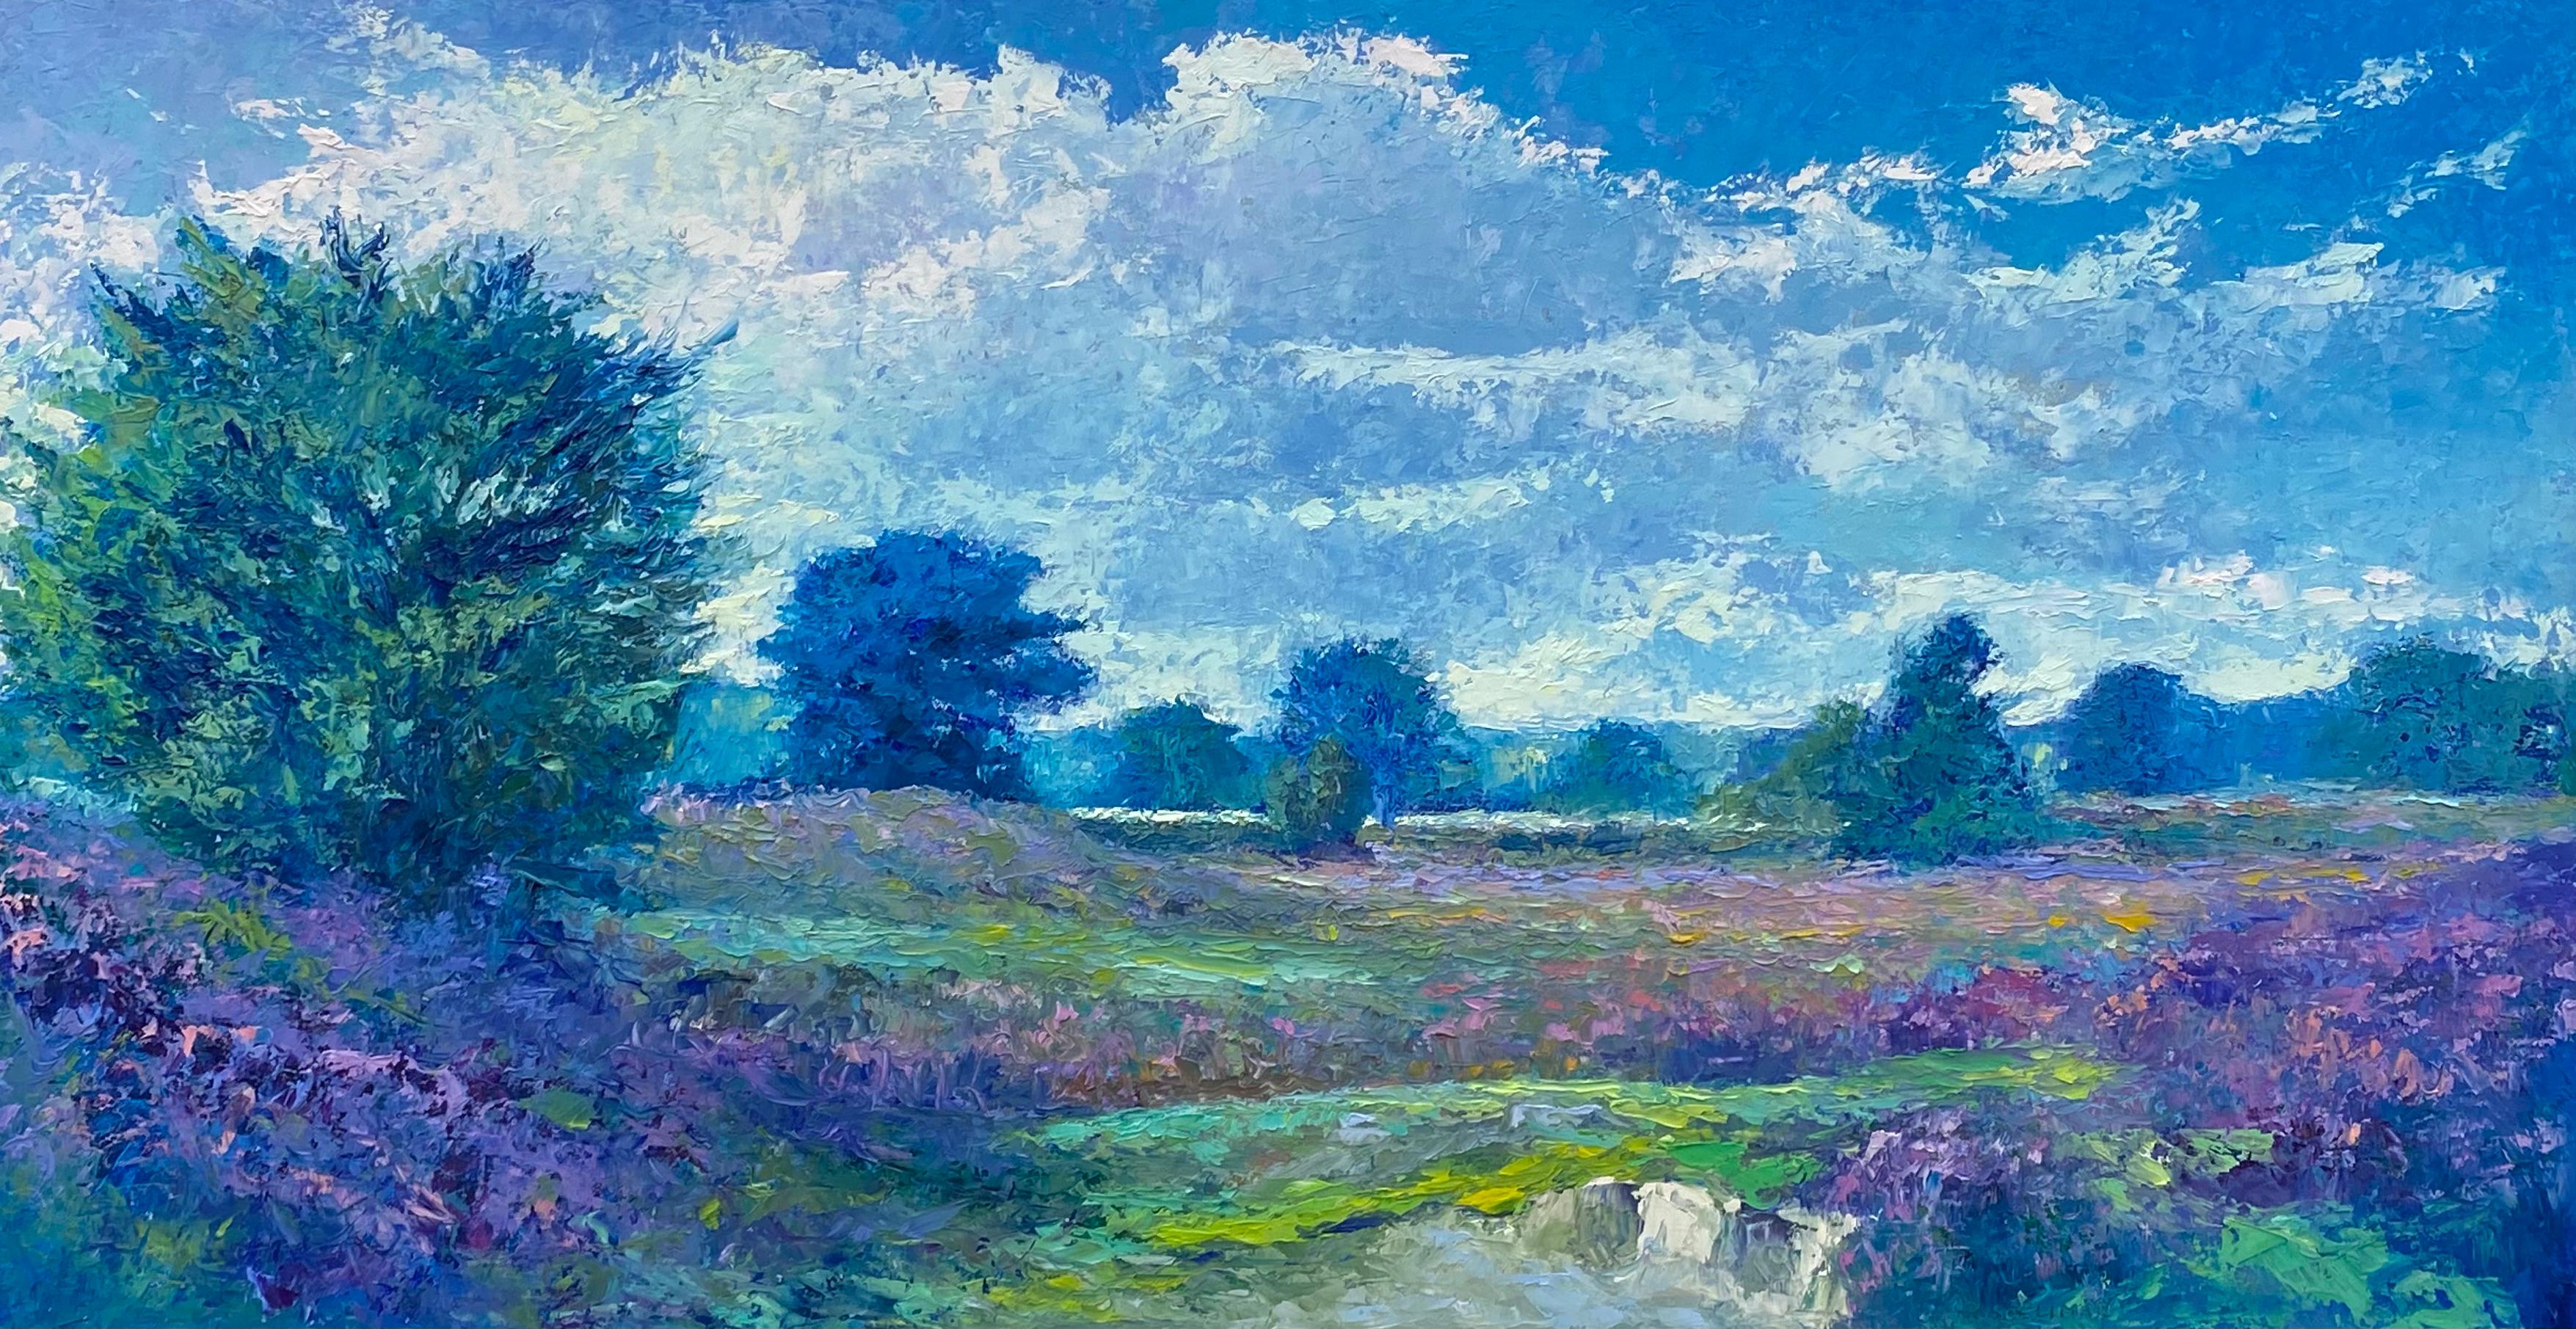 Sunny Day - 21st Century Contemporary Impressionistic Dutch Landscape Painting